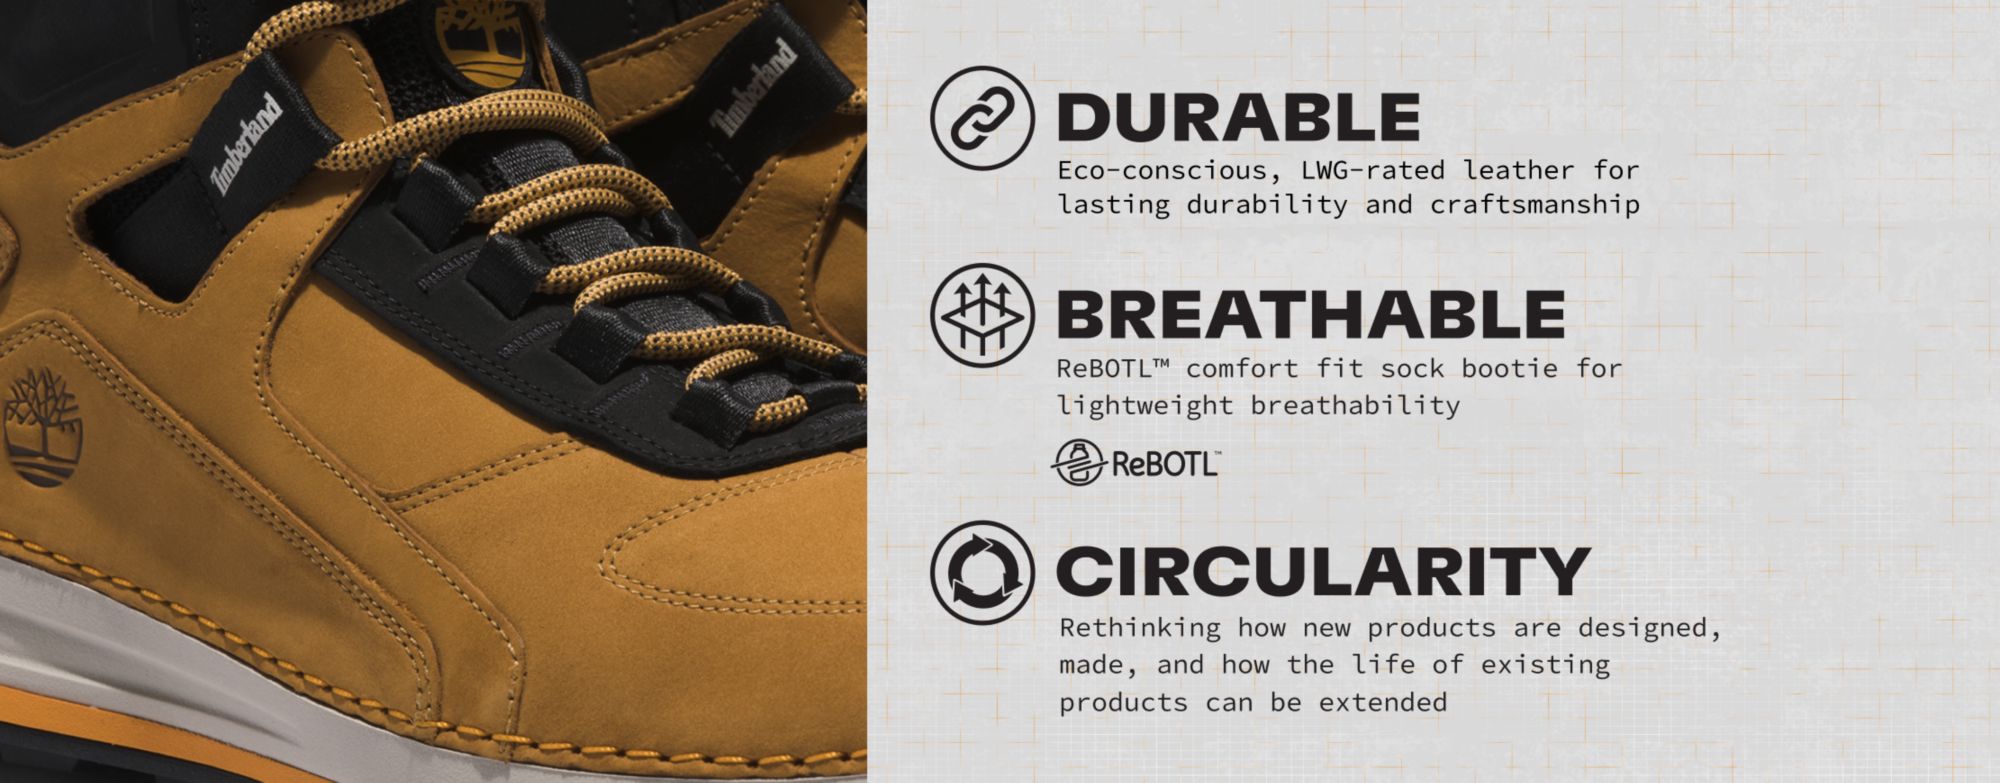 Timberloop Trekker Hiker. Durable: Eco-conscious, LWG-rated leather for lasting durability and craftsmanship. Breathable: ReBOTL™ comfort fit sock bootie for lightweight breathability. Circularity: Rethinking how new products are designed, made, and how the life of existing products can be extended.